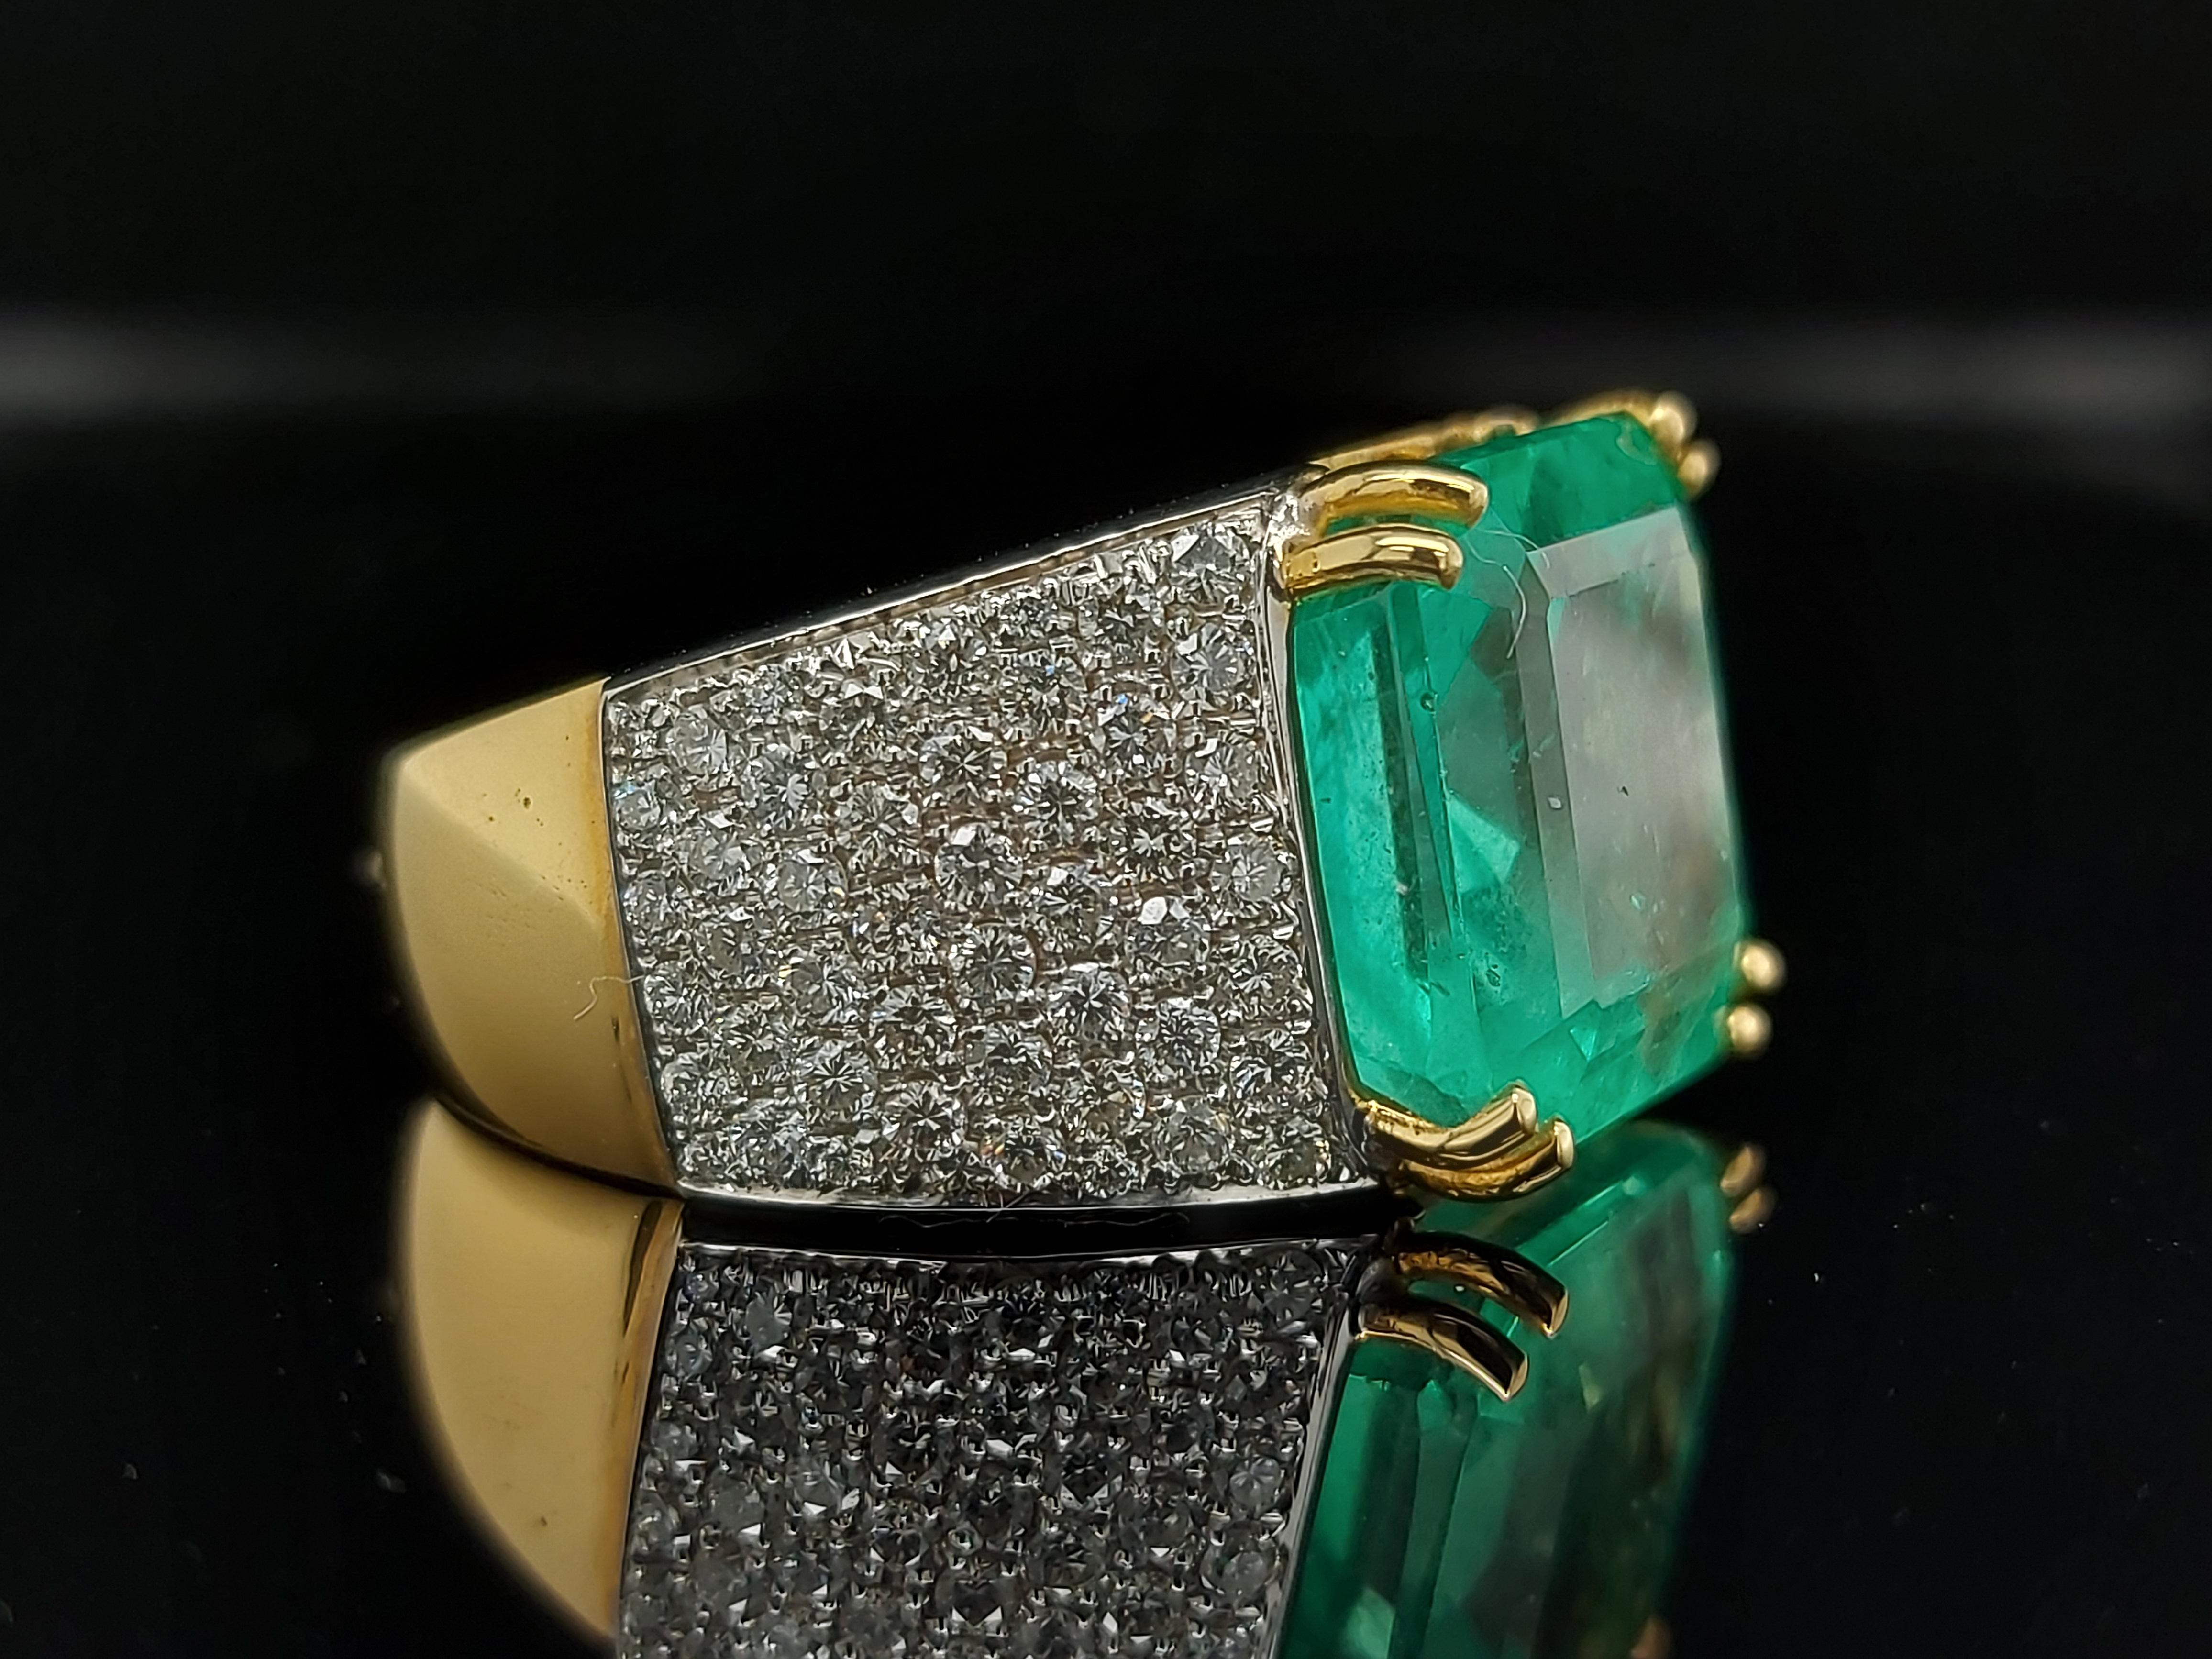 Impressive 18 kt solid gold ring with large 11.11 Carat Colombian emerald & 1.64 Carat Brilliant Cut diamonds.

An amazing handcrafted piece of jewelry to enlighten your day after day

Emerald: Columbian emerald ca. 11.11 Cts

Diamonds: Brilliant